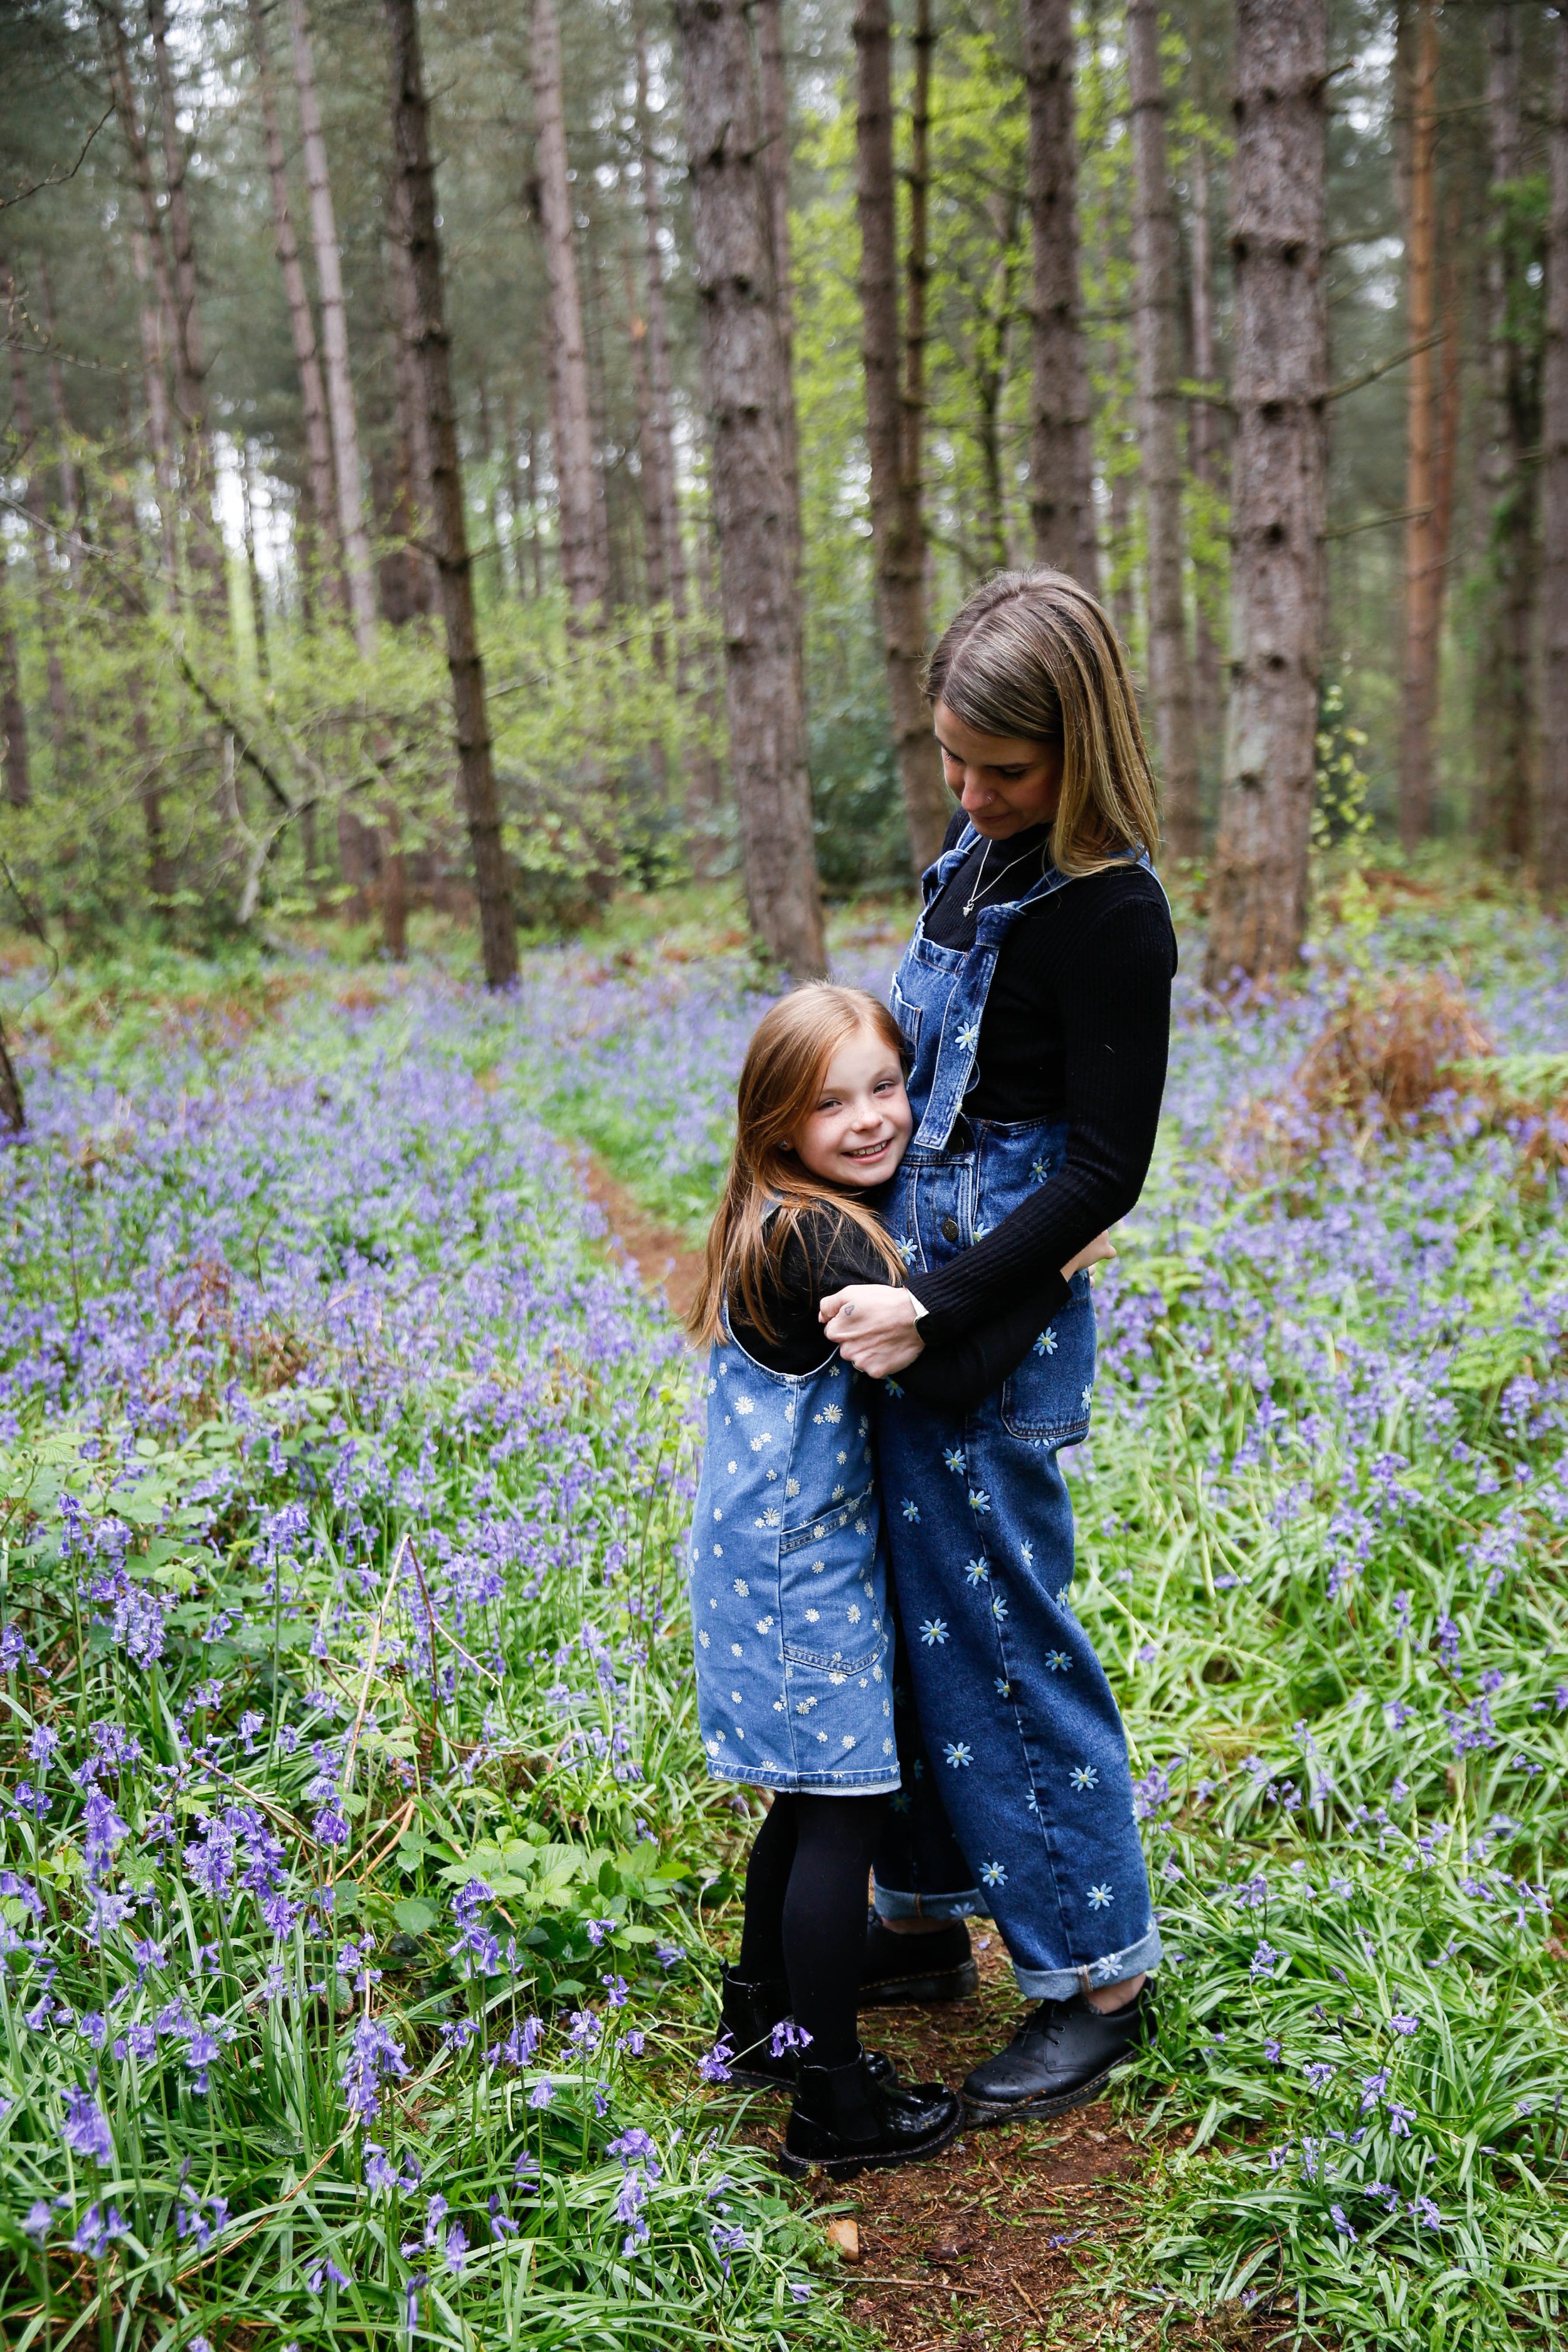 MUM AND DAUGHTER PHOTO SHOOT IN THE BLUEBELLS | BERKSHIRE PORTRAIT SHOOTS06 choice .JPG